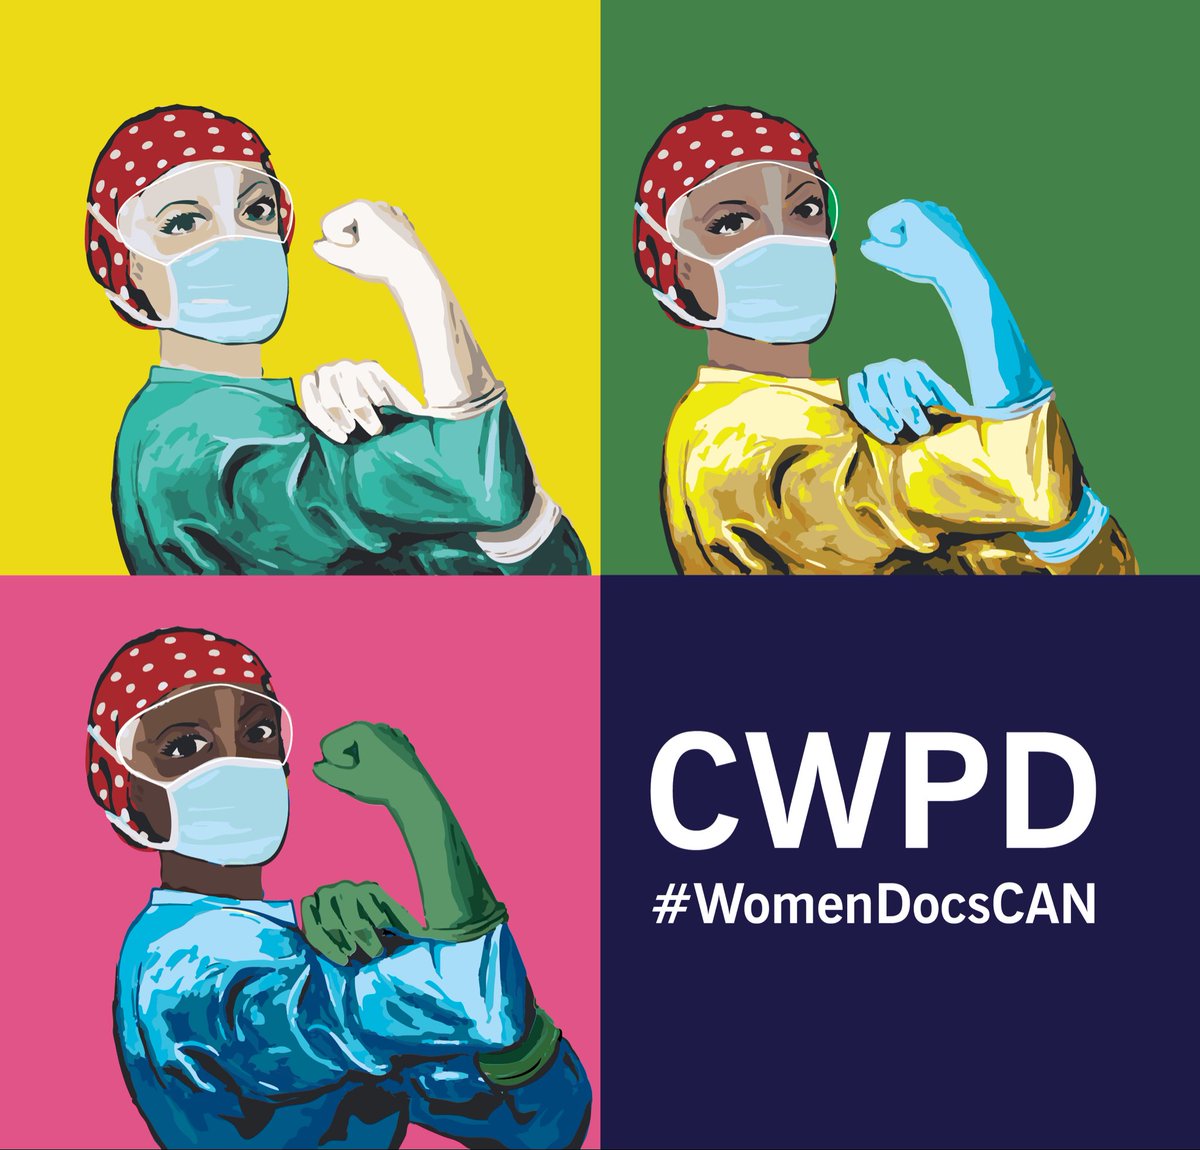 Happy Canadian Women Physicians Day! This is a day for us to reflect on the challenges we've overcome, and where we're going. To everyone breaking down barriers and paving the way, we see you and we thank you! #WomenDocsCAN . Graphic by Dr. Michiko Maruyama.